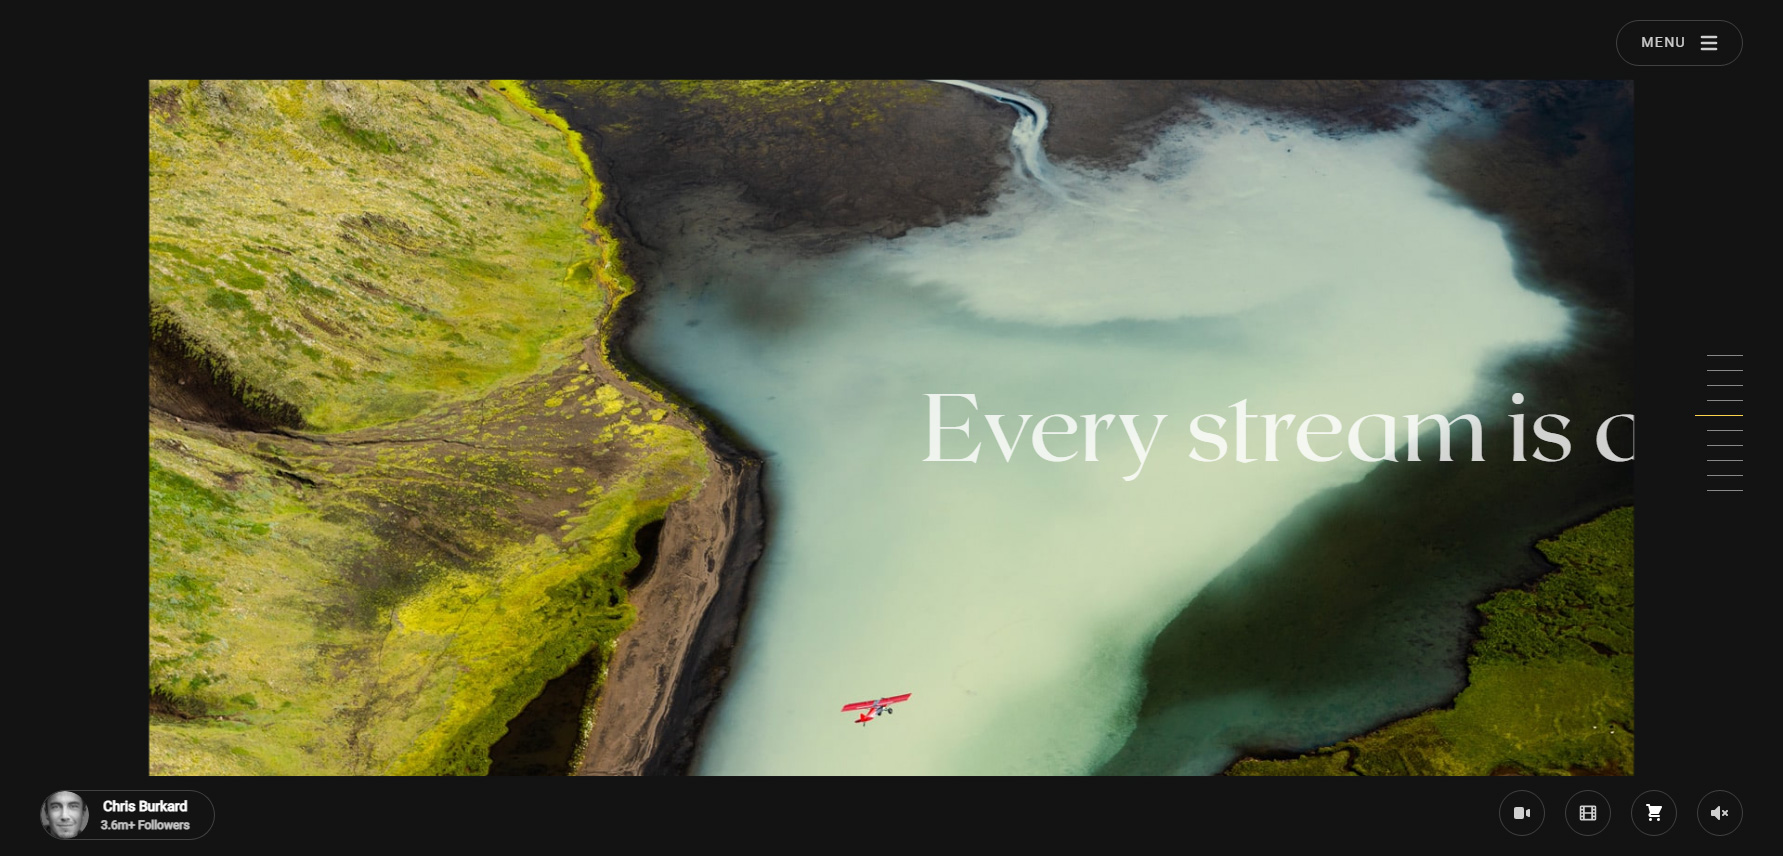 At Glacier's End - Website of the Day